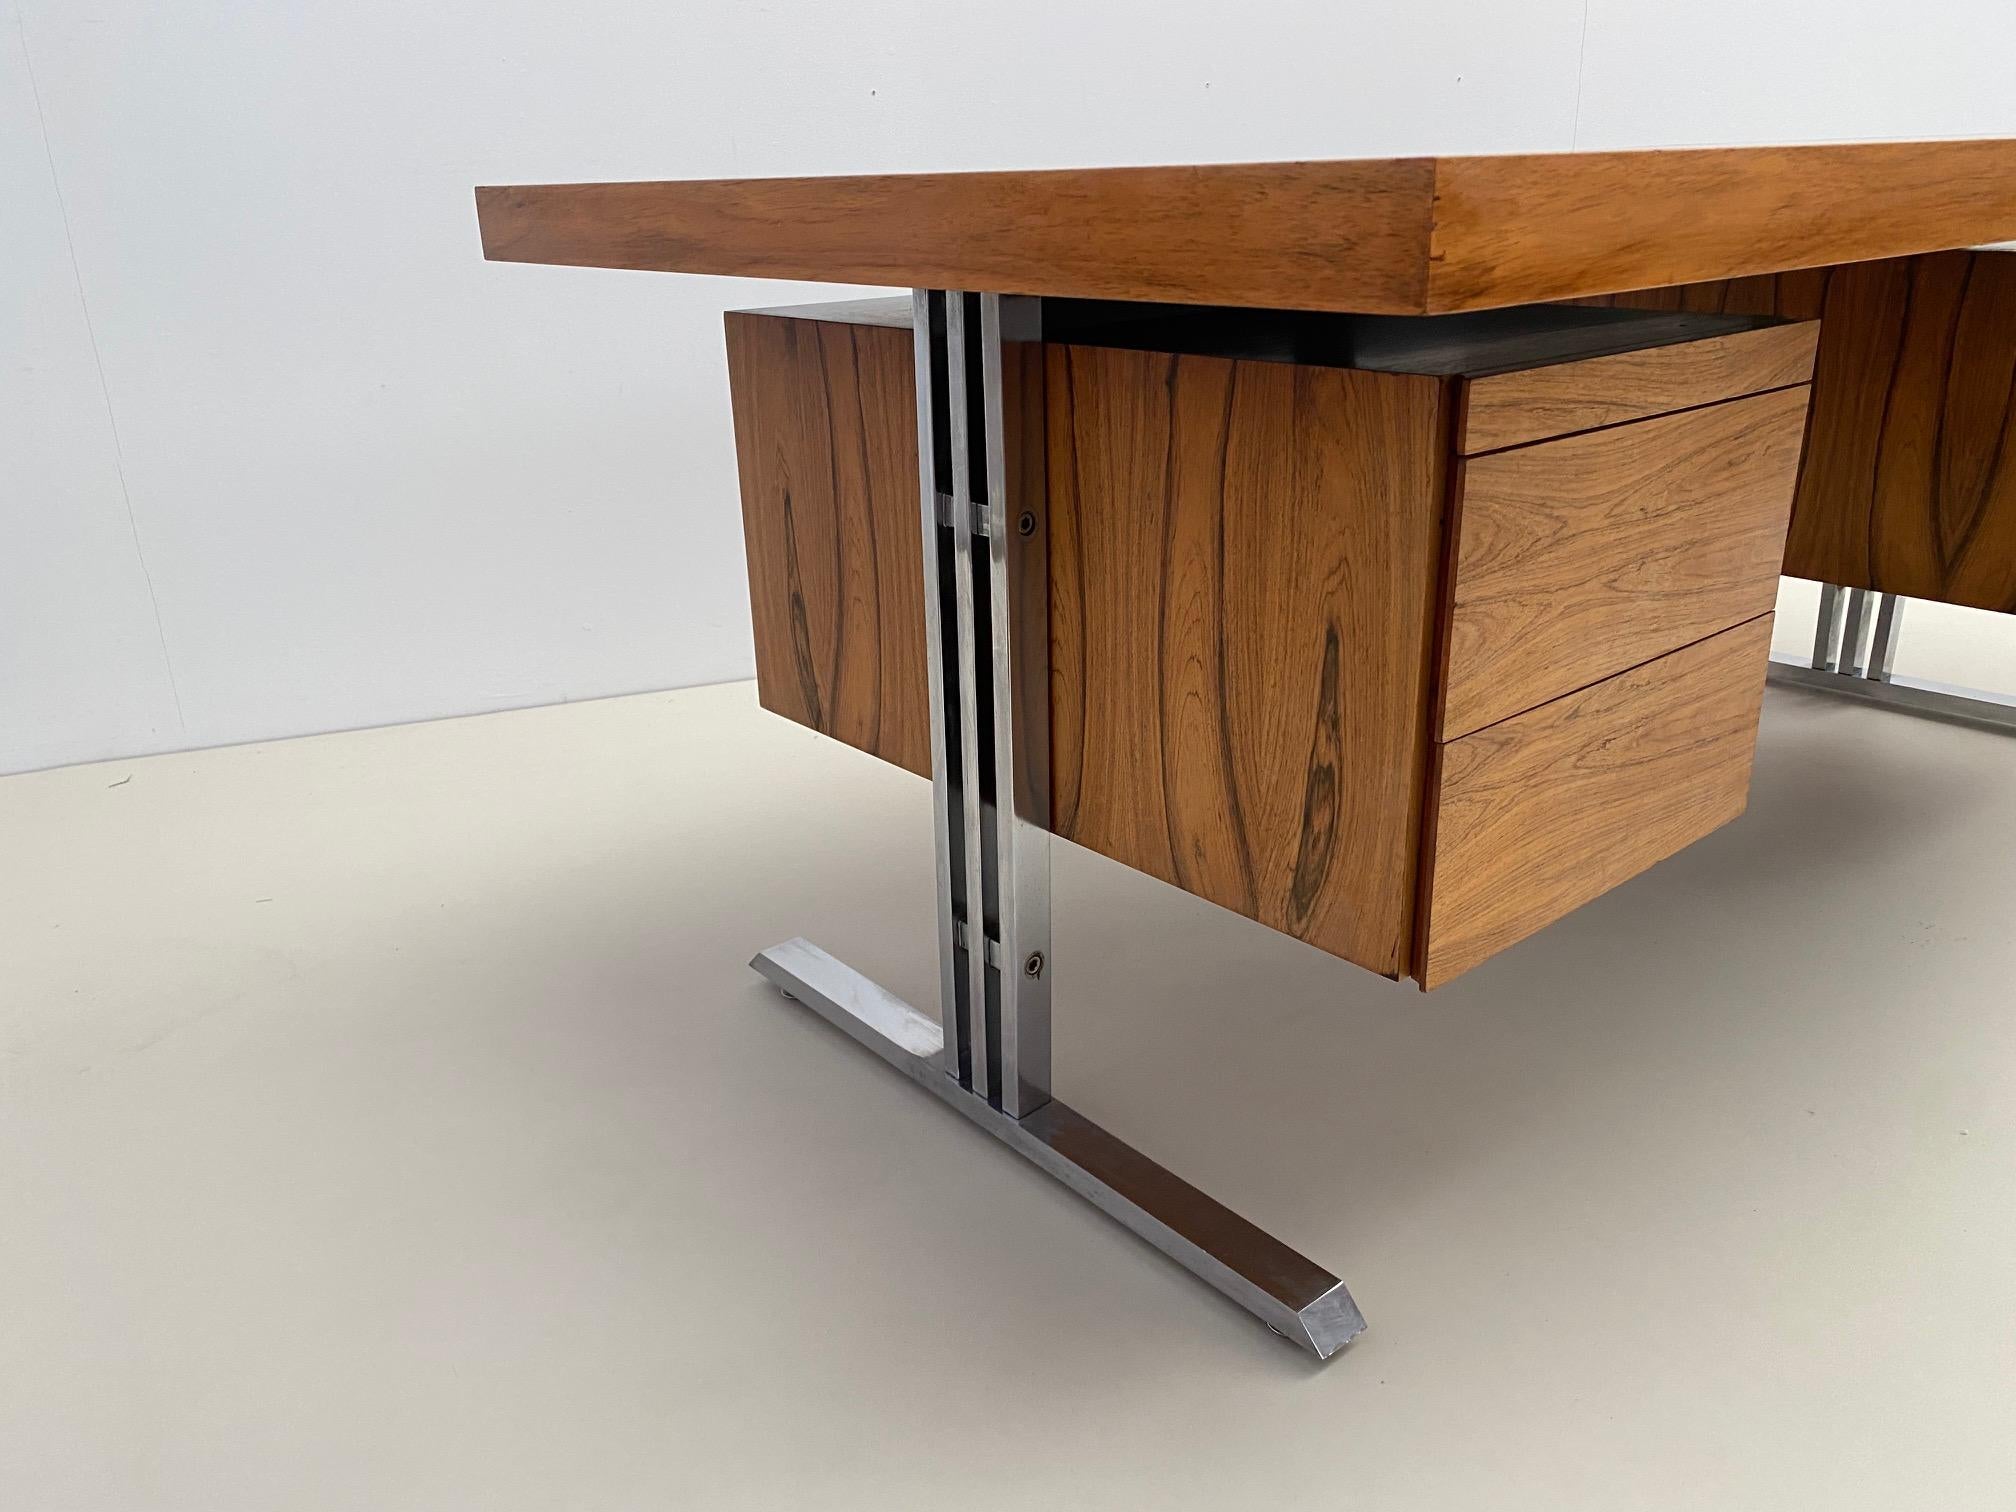 Mid-Century Modern Italian Desk with Drawers , Wood and Chrome, 1970s For Sale 4